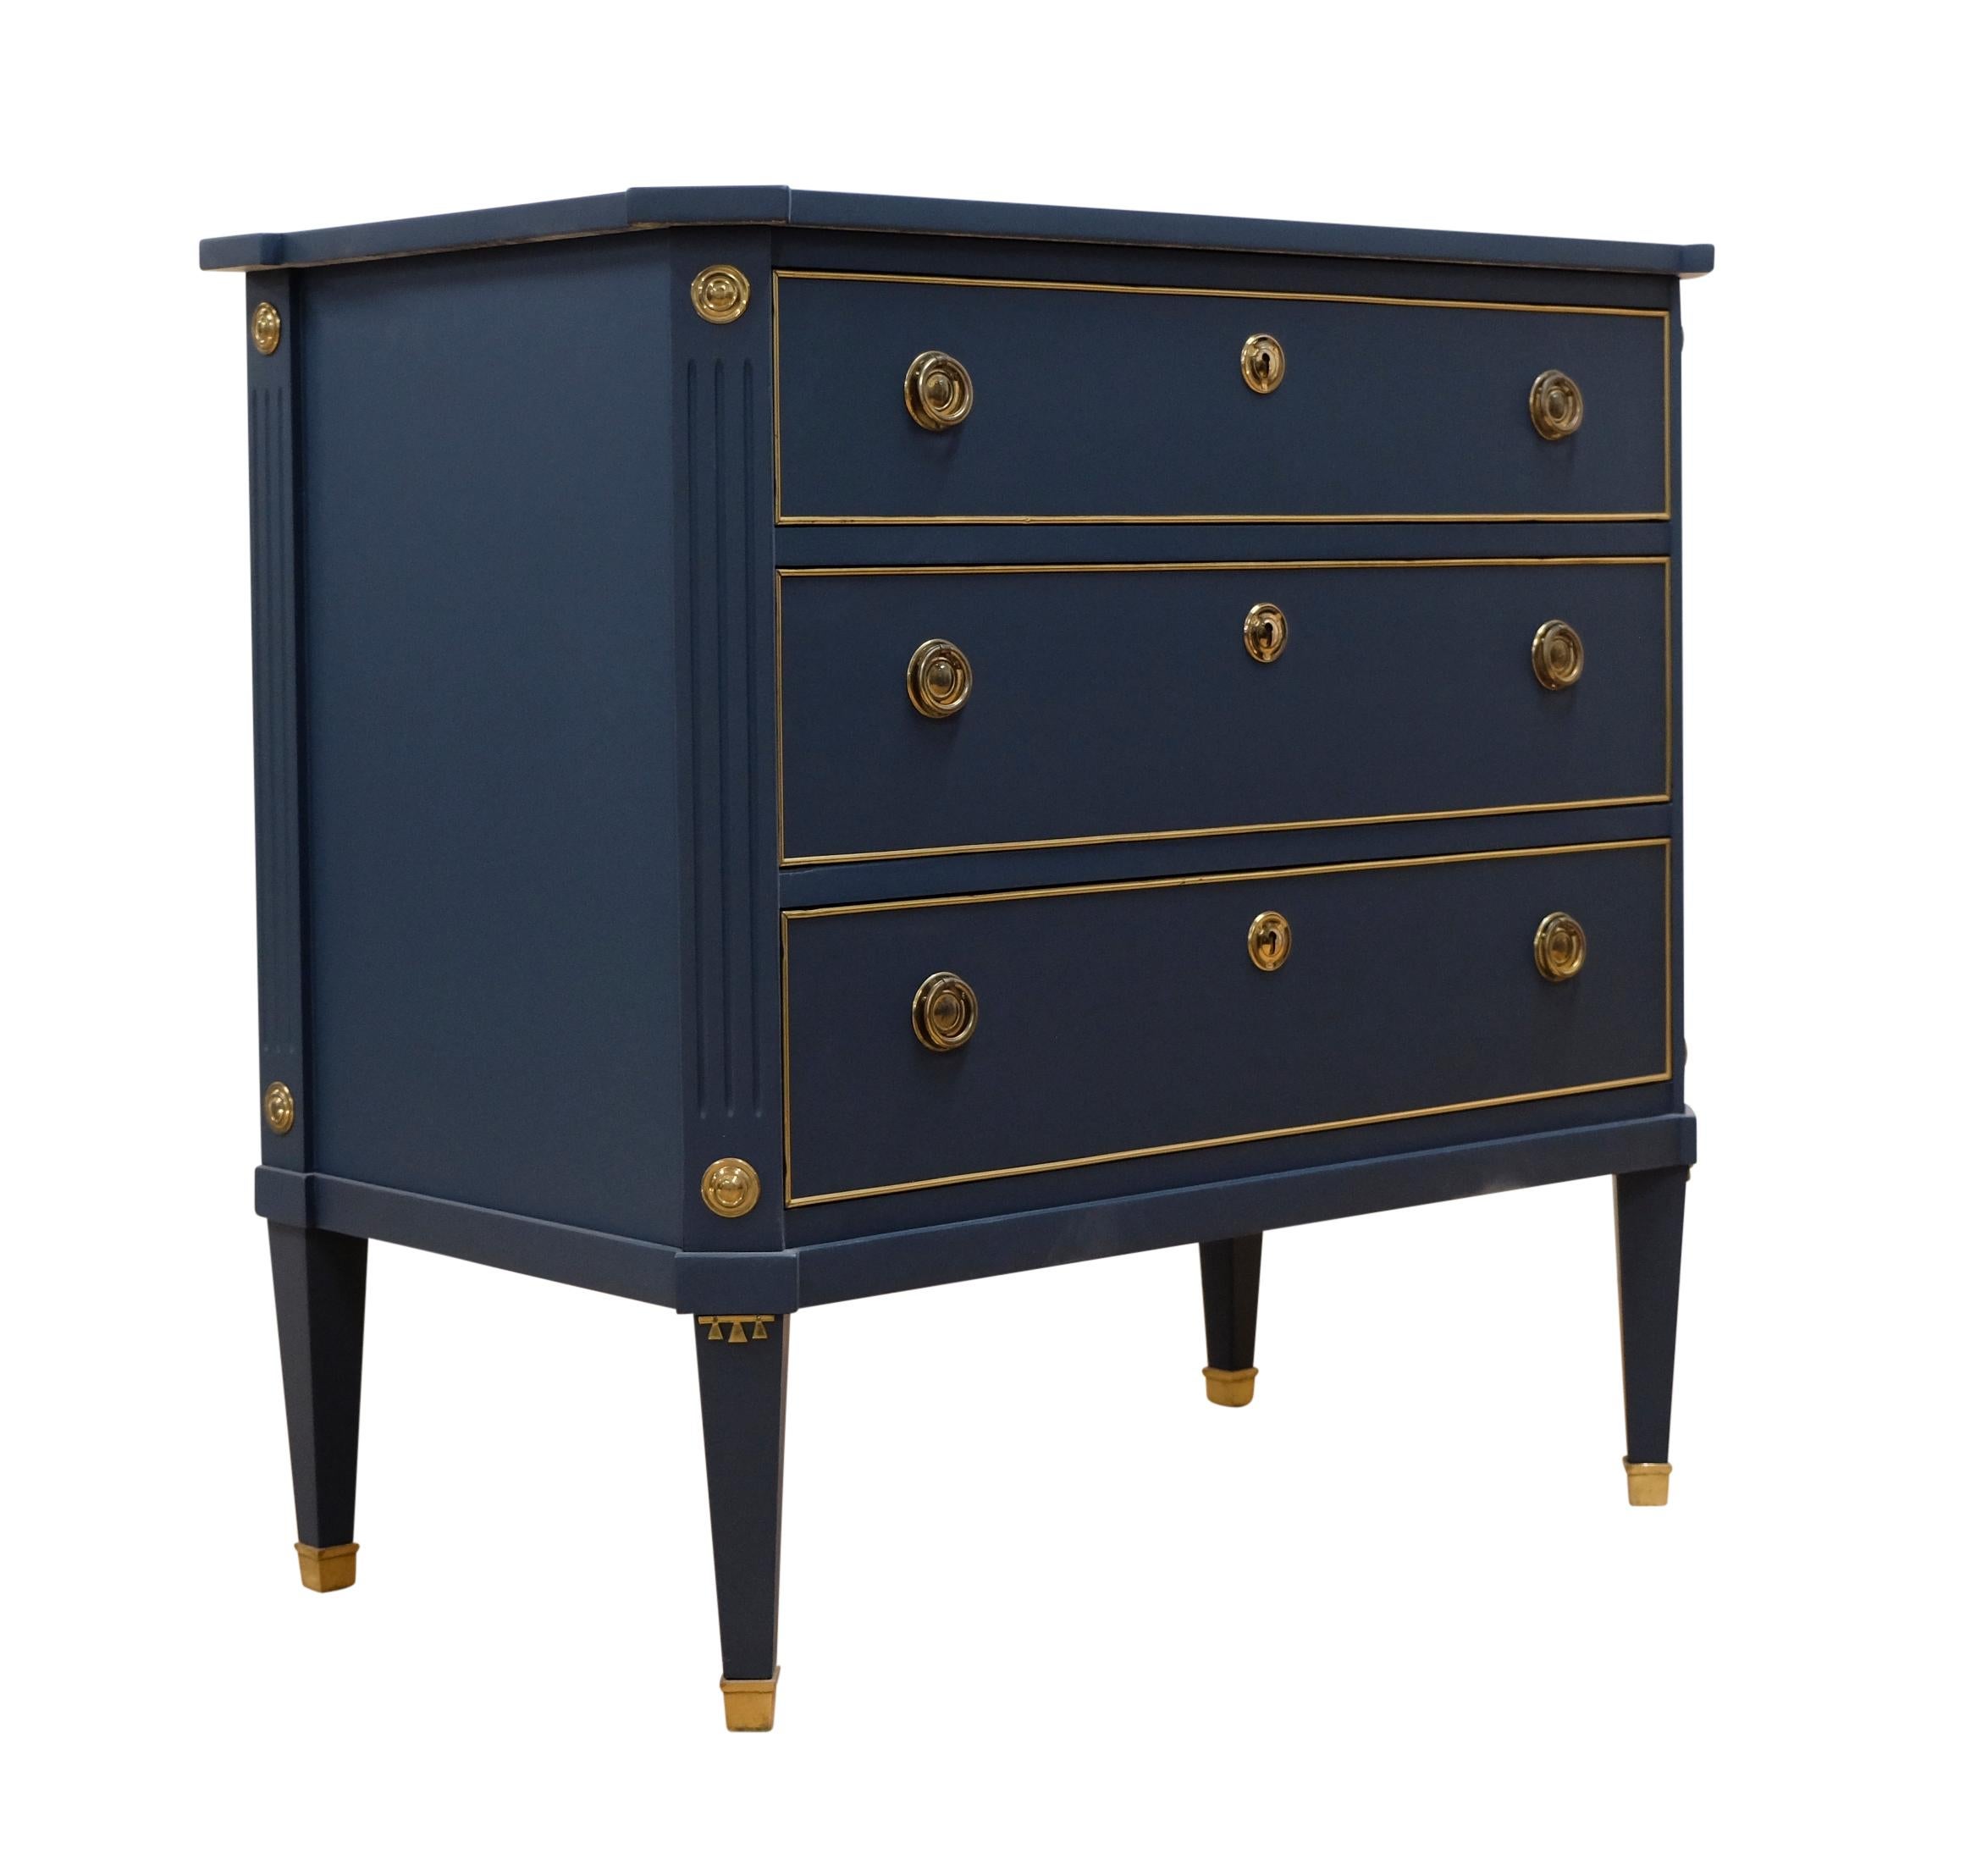 Gustavian dresser renovated to highest standard and painted in midnight blue. Fine moldings around drawers and fittings in solid brass.  Marble top

Width 84 cm / 33.1